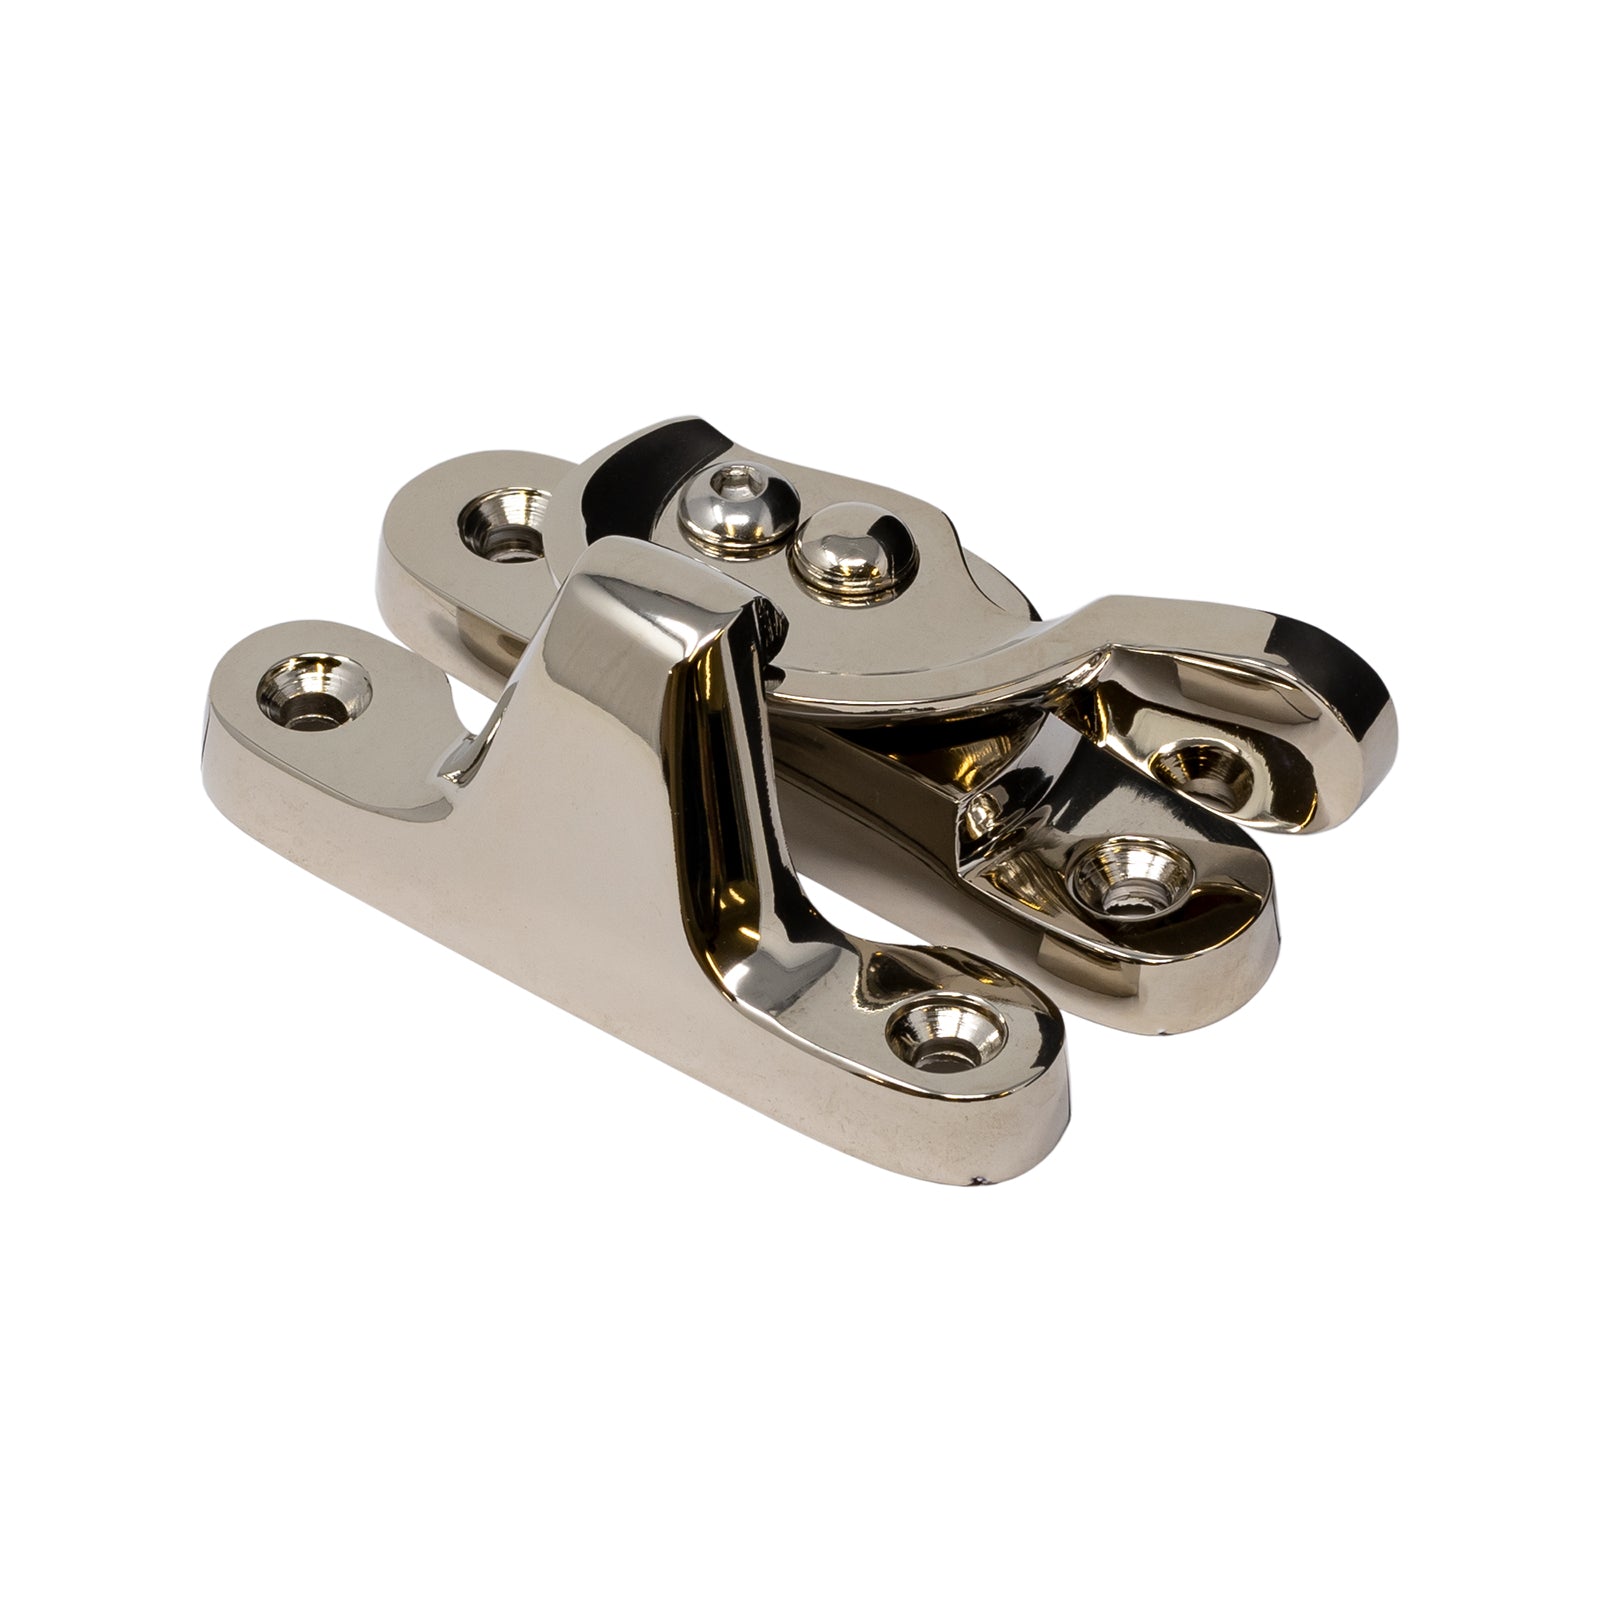 Fitch Sash Window Fastener in Polished Nickel Finish SHOW